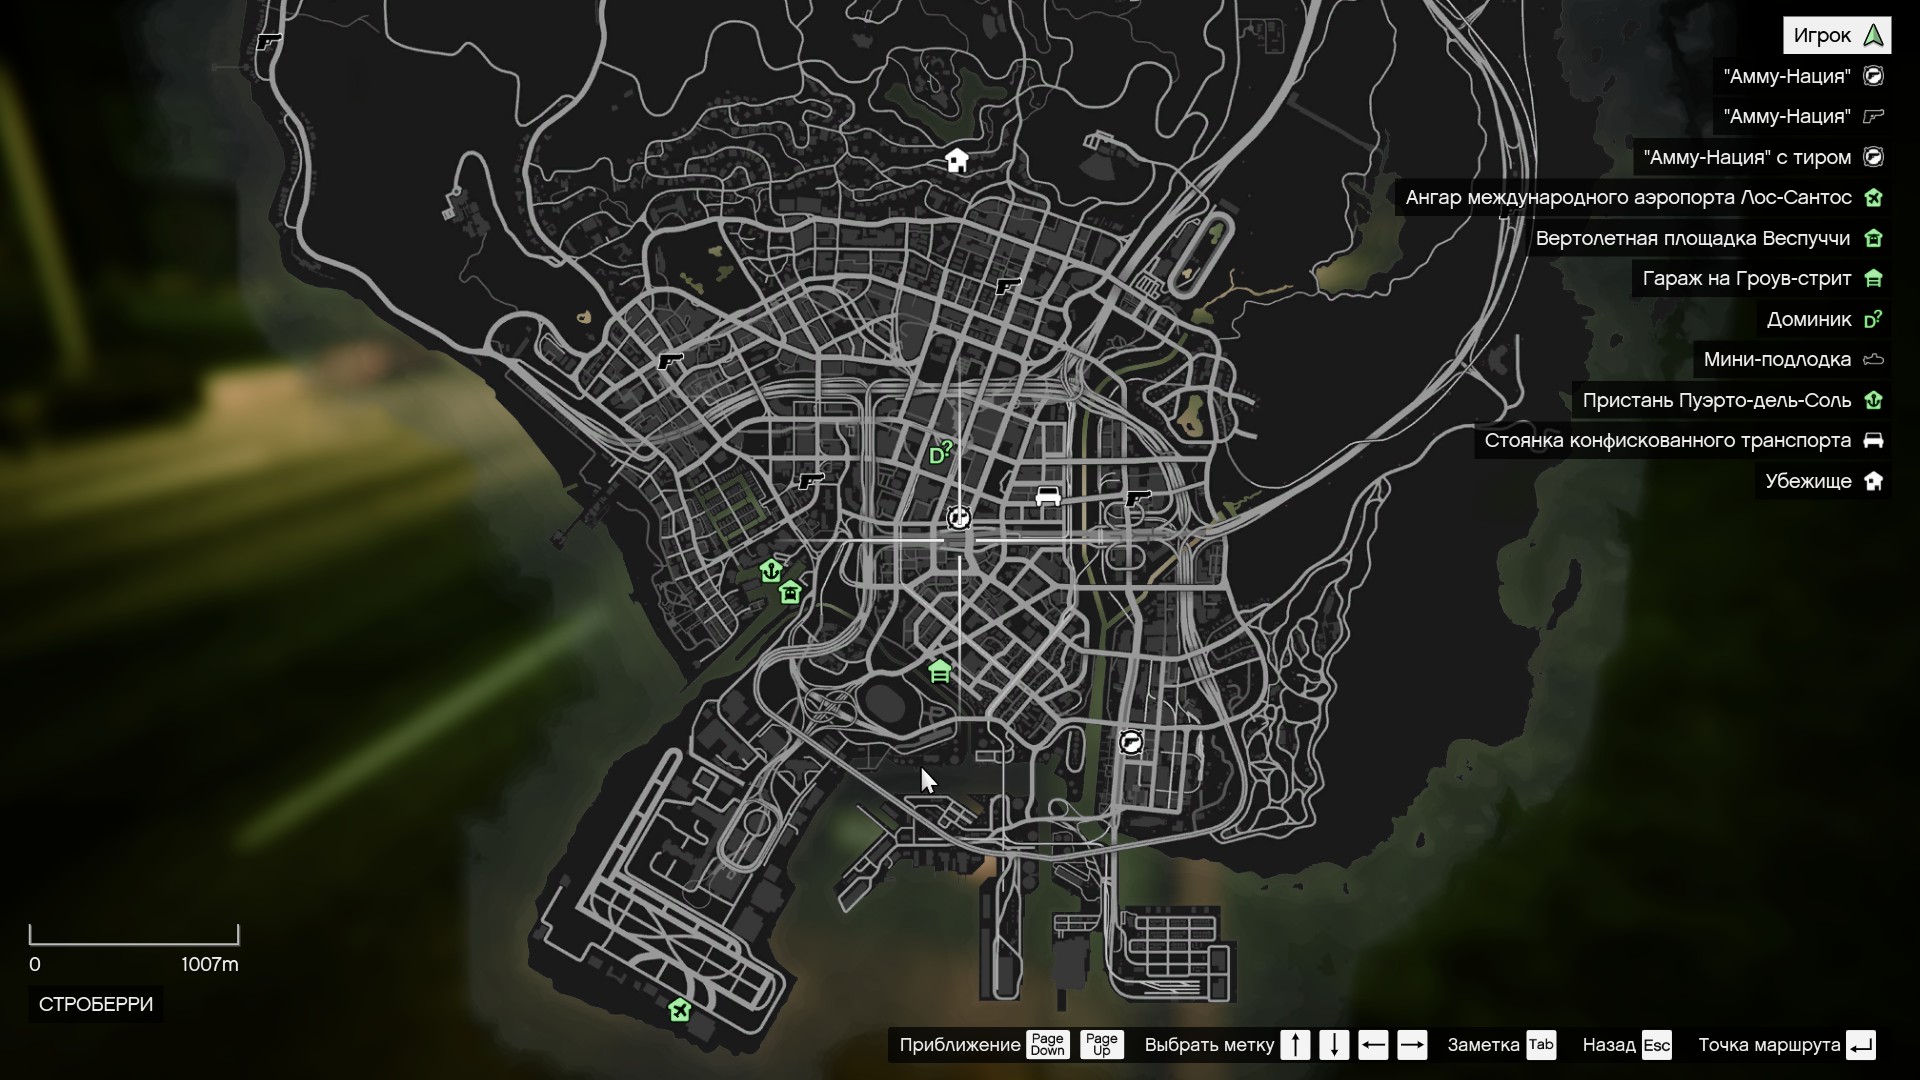 Grand Theft Auto V Completion Guide - Playthrough - Collect 50 pieces of a spaceship, 2 part - 62D6B50